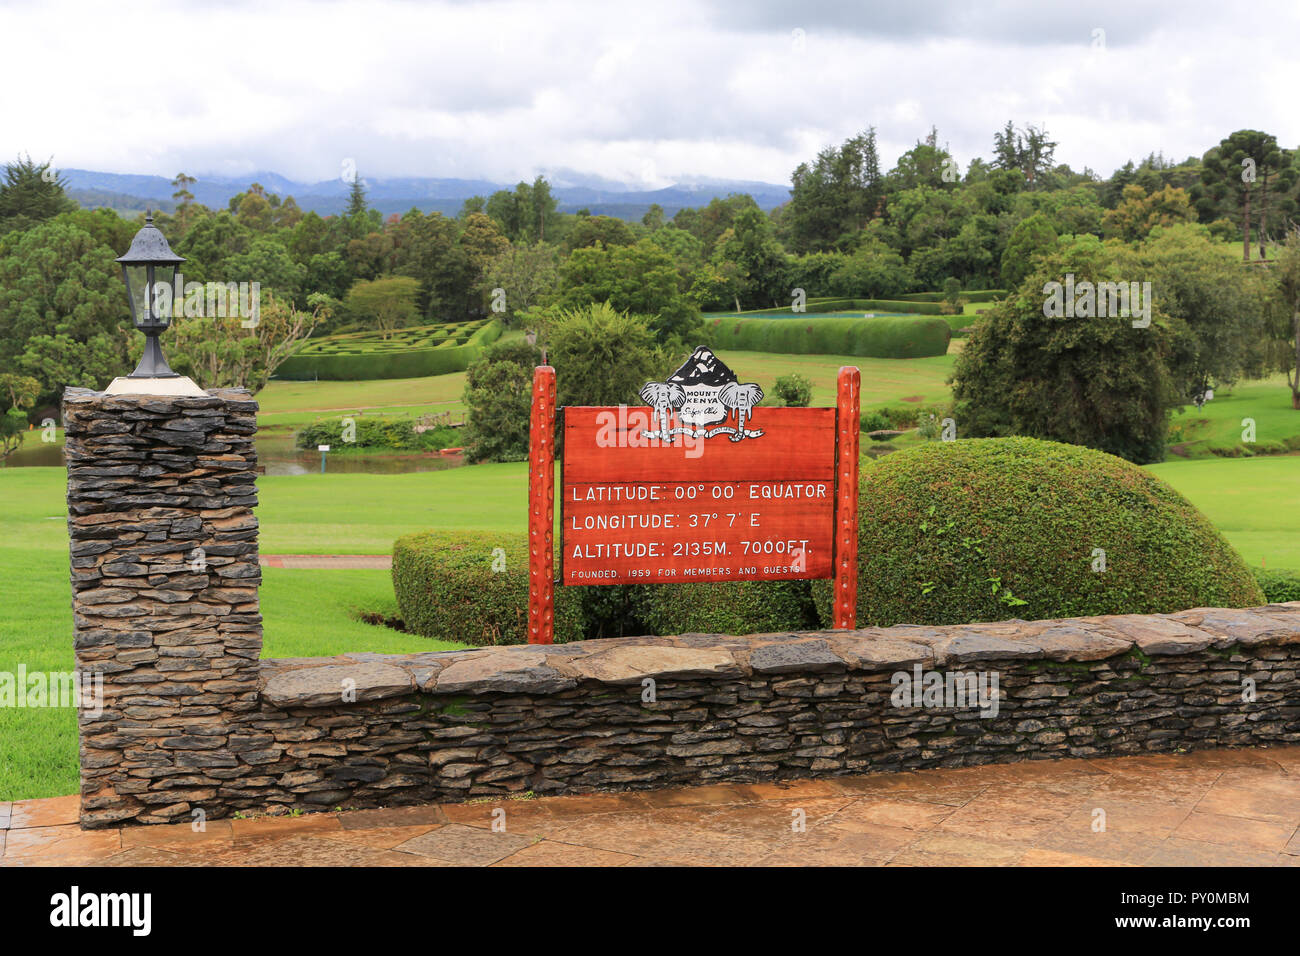 Sign at the Mount Kenya Safari Club located on the equator in East Africa. Now a Fairmont Hotel, it was once owned by actor William Holden. Stock Photo